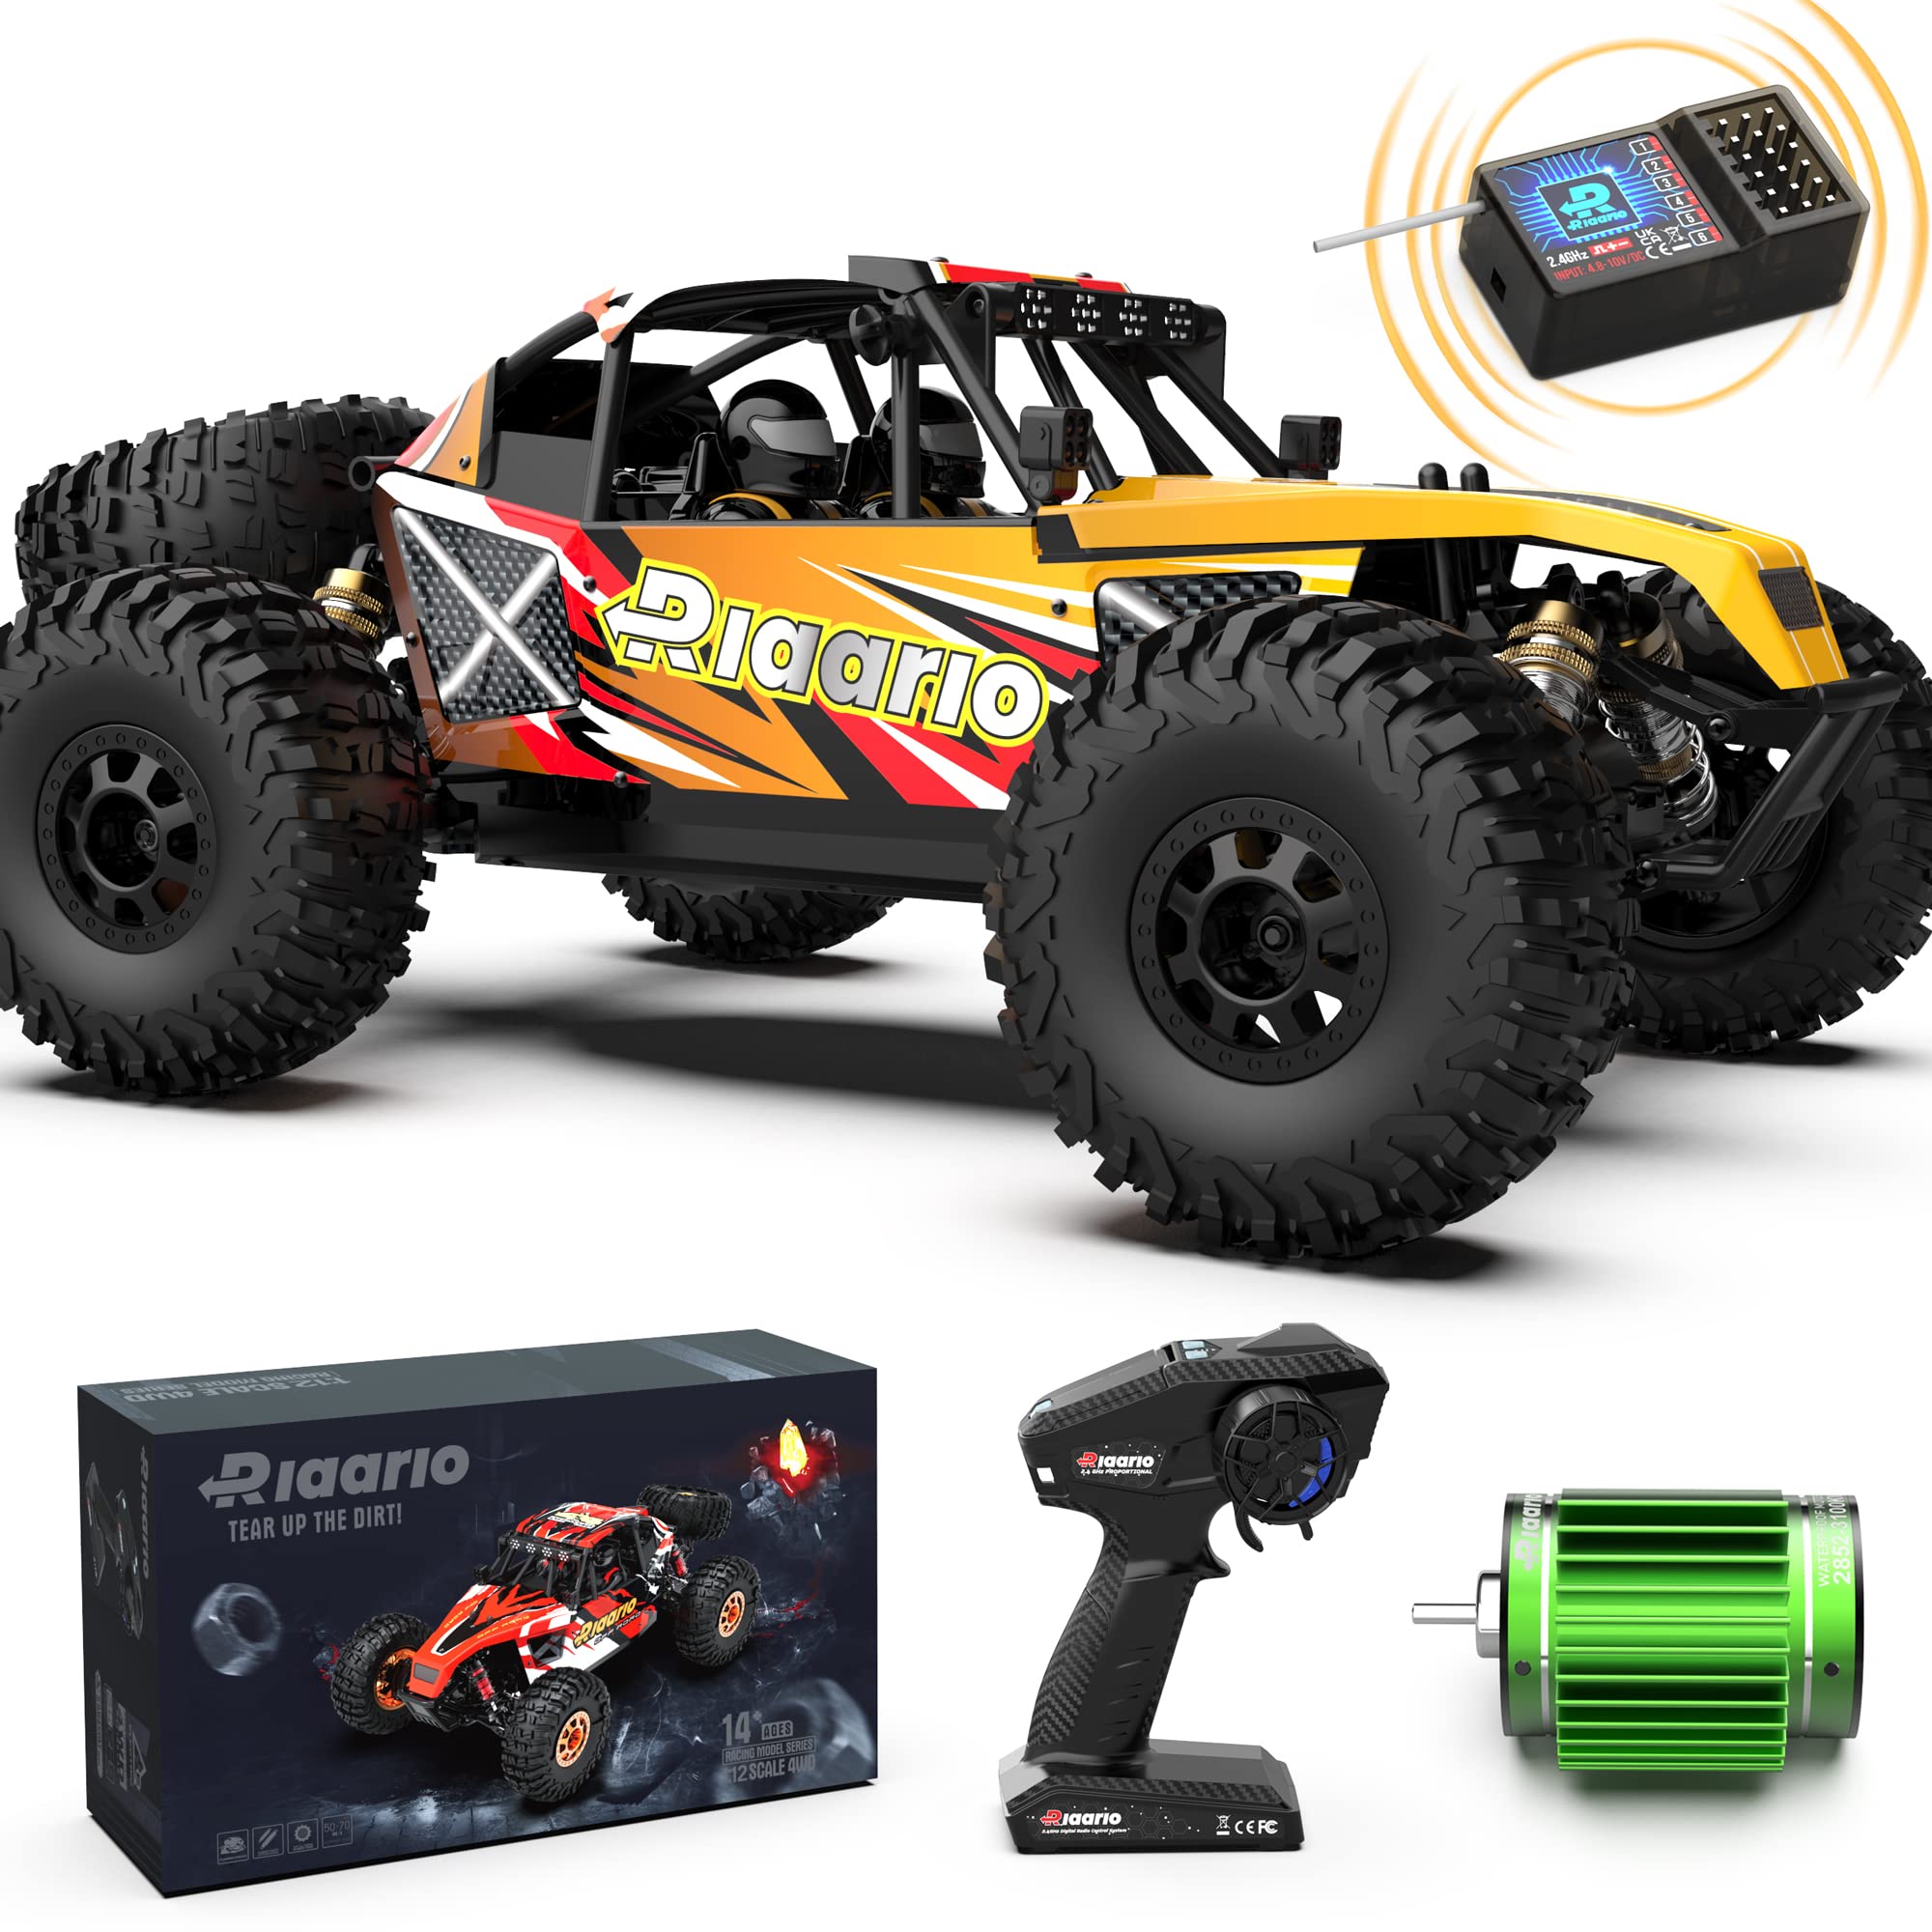 RIAARIO 1:12 RTR Brushless RC Desert Cars for Adults, Max 45MPH Fast RC Cars, Monster Truck with Independent ESC, 4X4 RC Truck for Boys, All Terrain Remote Control Car with Oil Filled Shocks(Yellow)